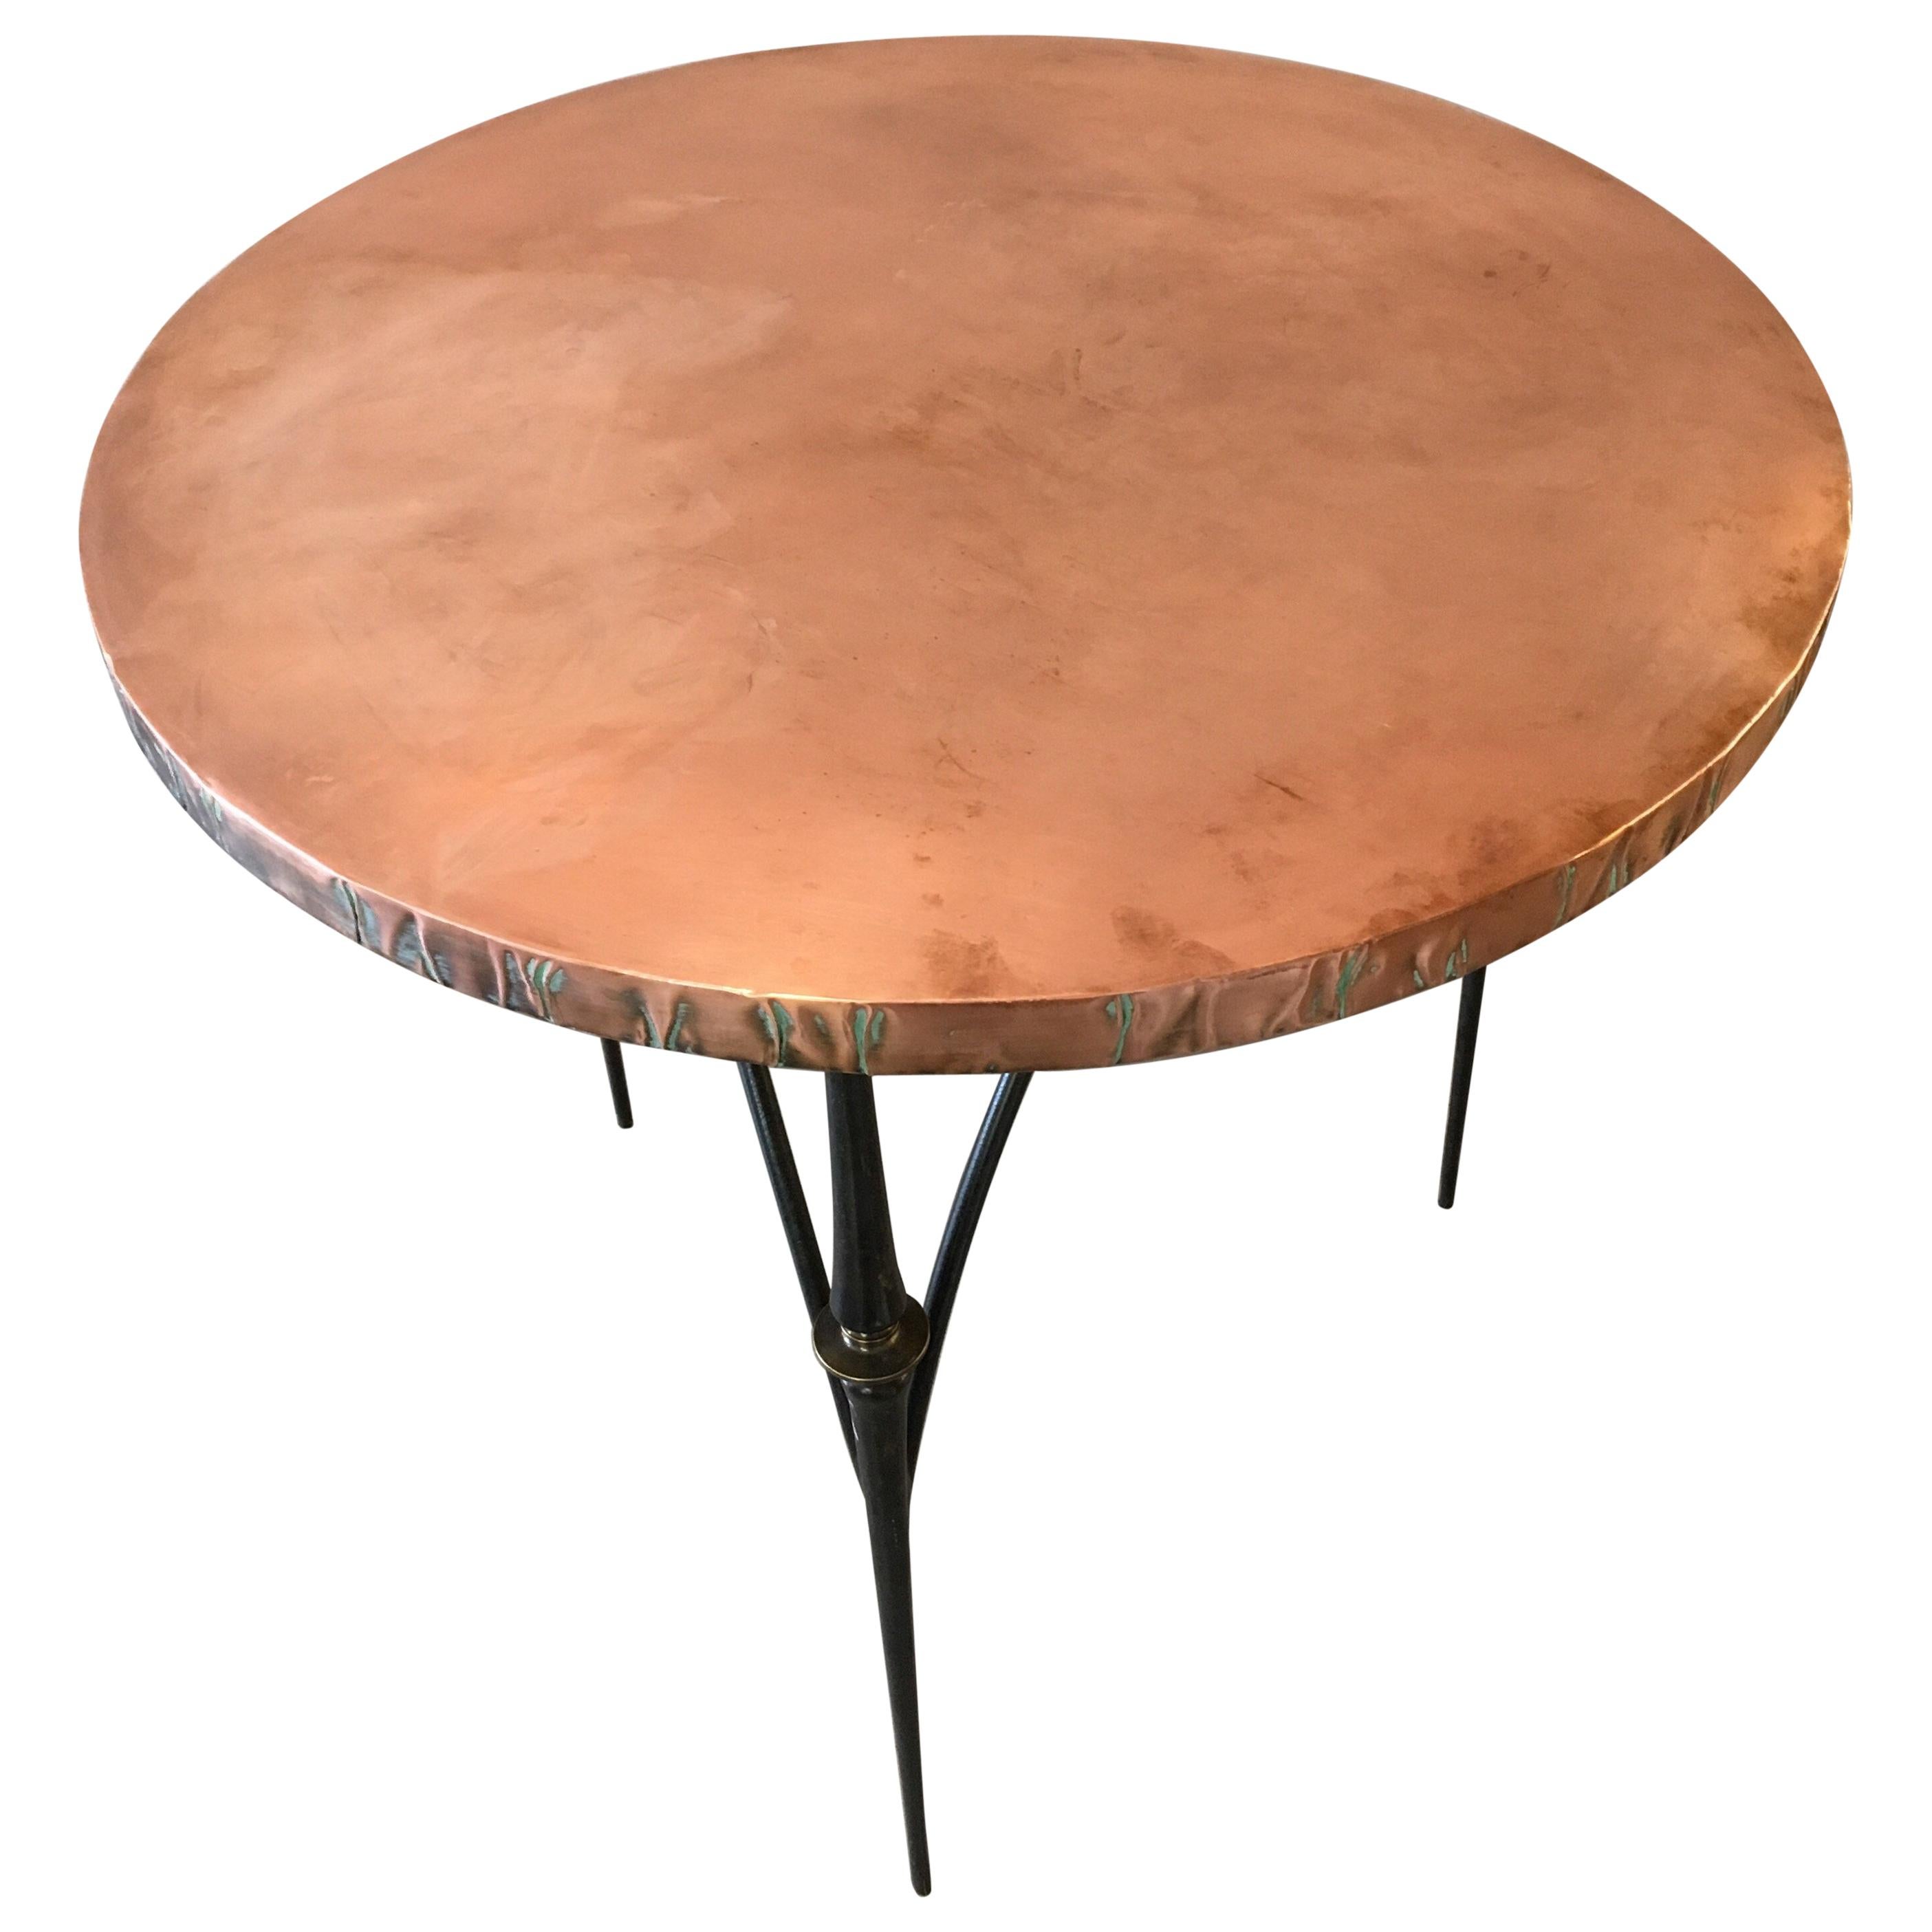 Three Matching Brutalist Sculptural Hammered Copper Centre Foyer Dining Tables